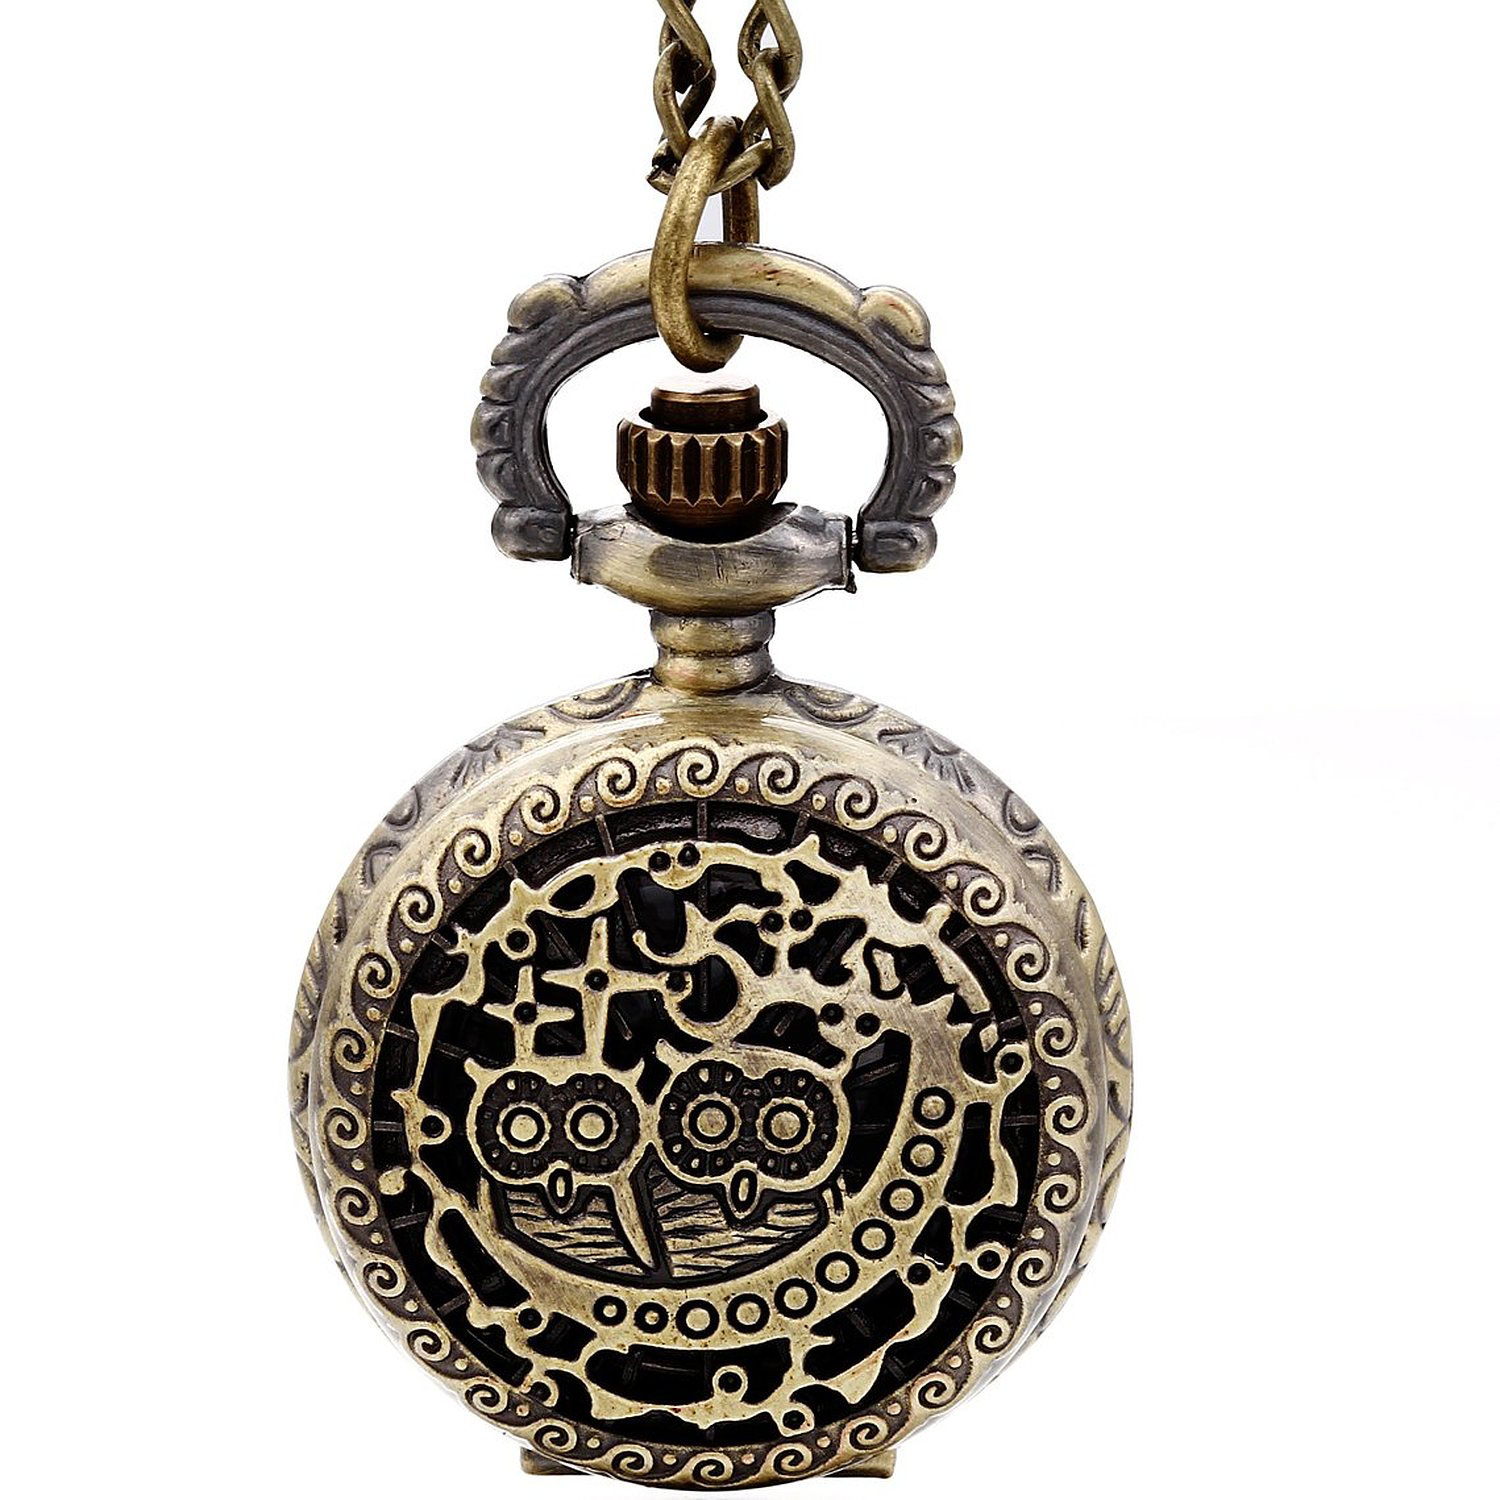 Two Small Owl Quartz Pocket Chain Watch (with Padded Box) - Click Image to Close